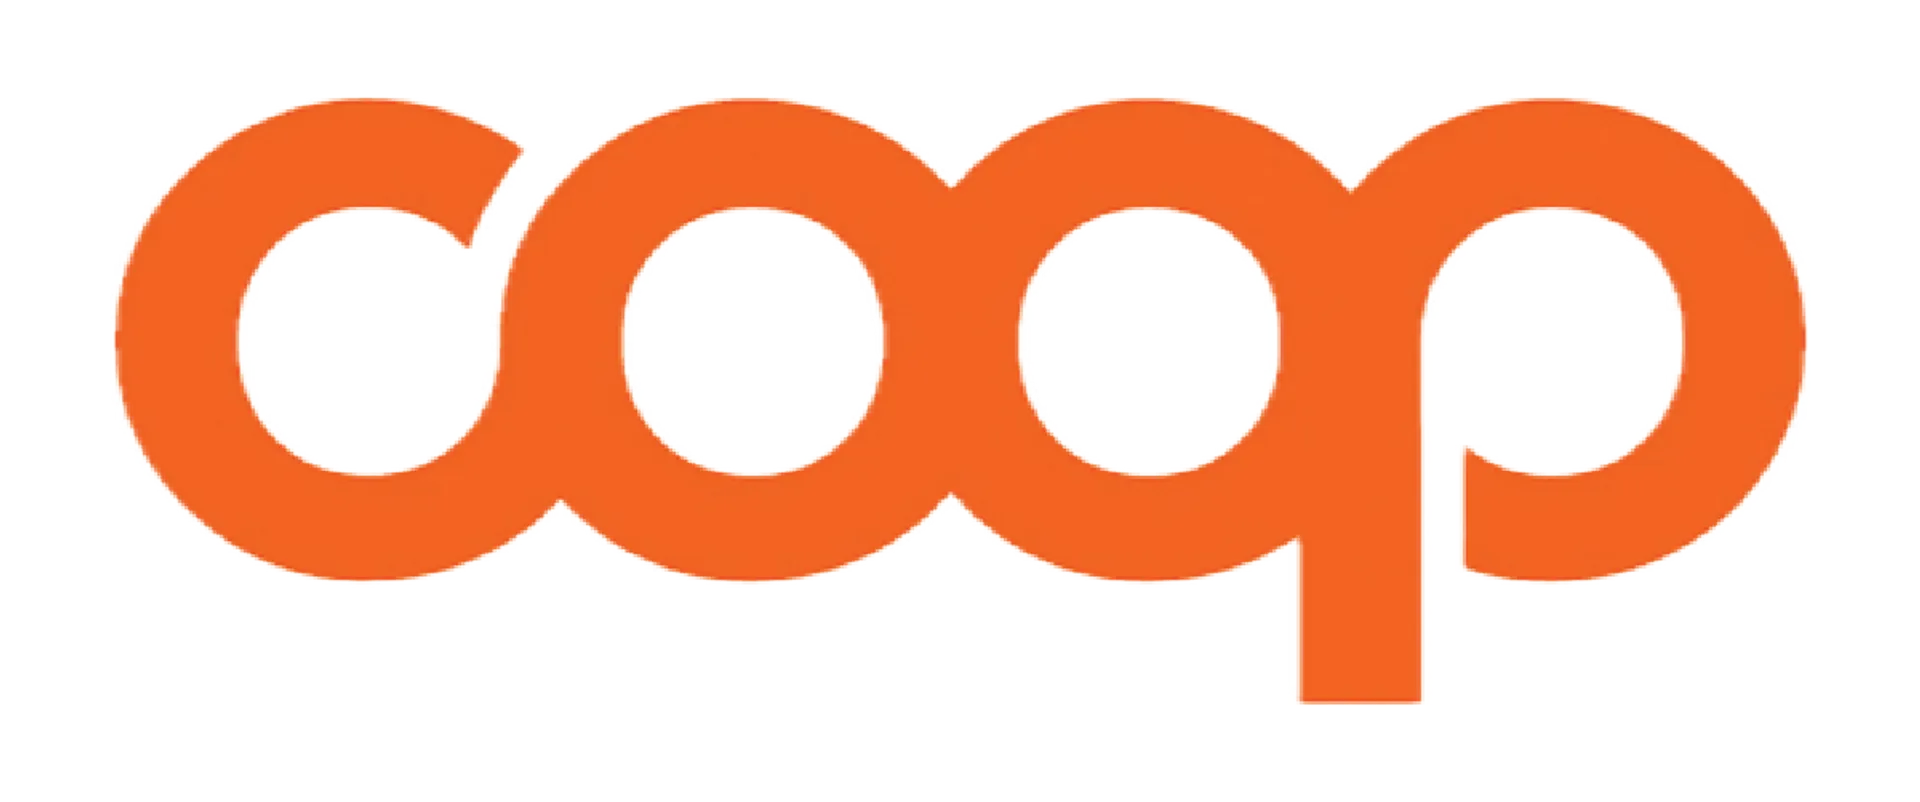 COOP logo of current catalogue